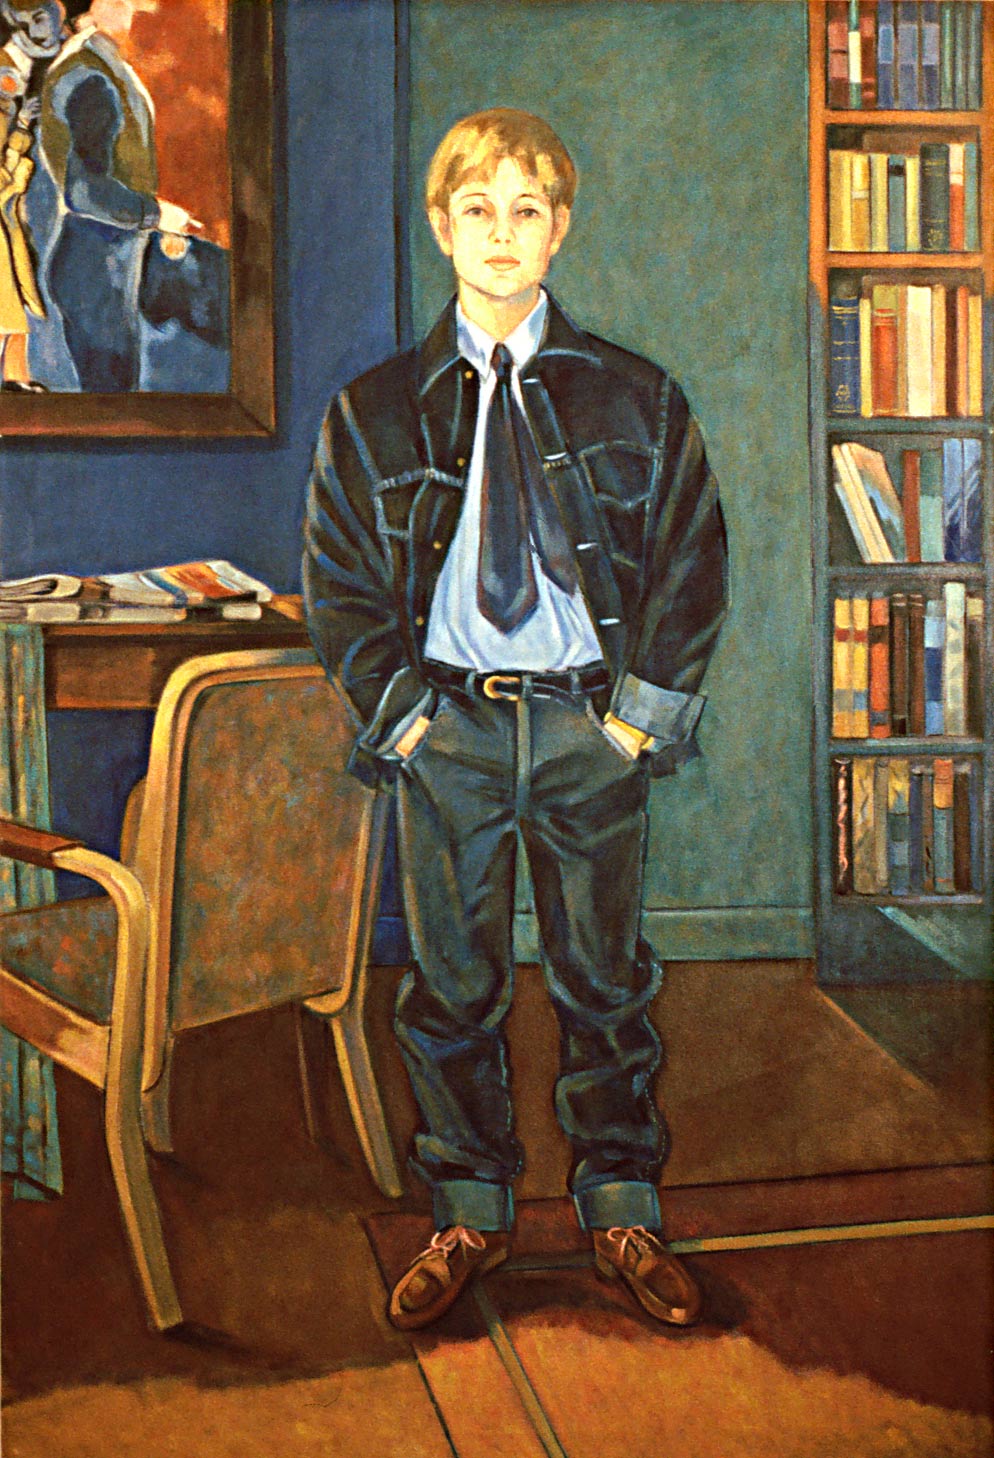 Thumbnail of Max Kitaj in London: figure painting by Ethel Fisher, 1994, oil on canvas, 56 x 38 inches, mid-twentieth century painting.